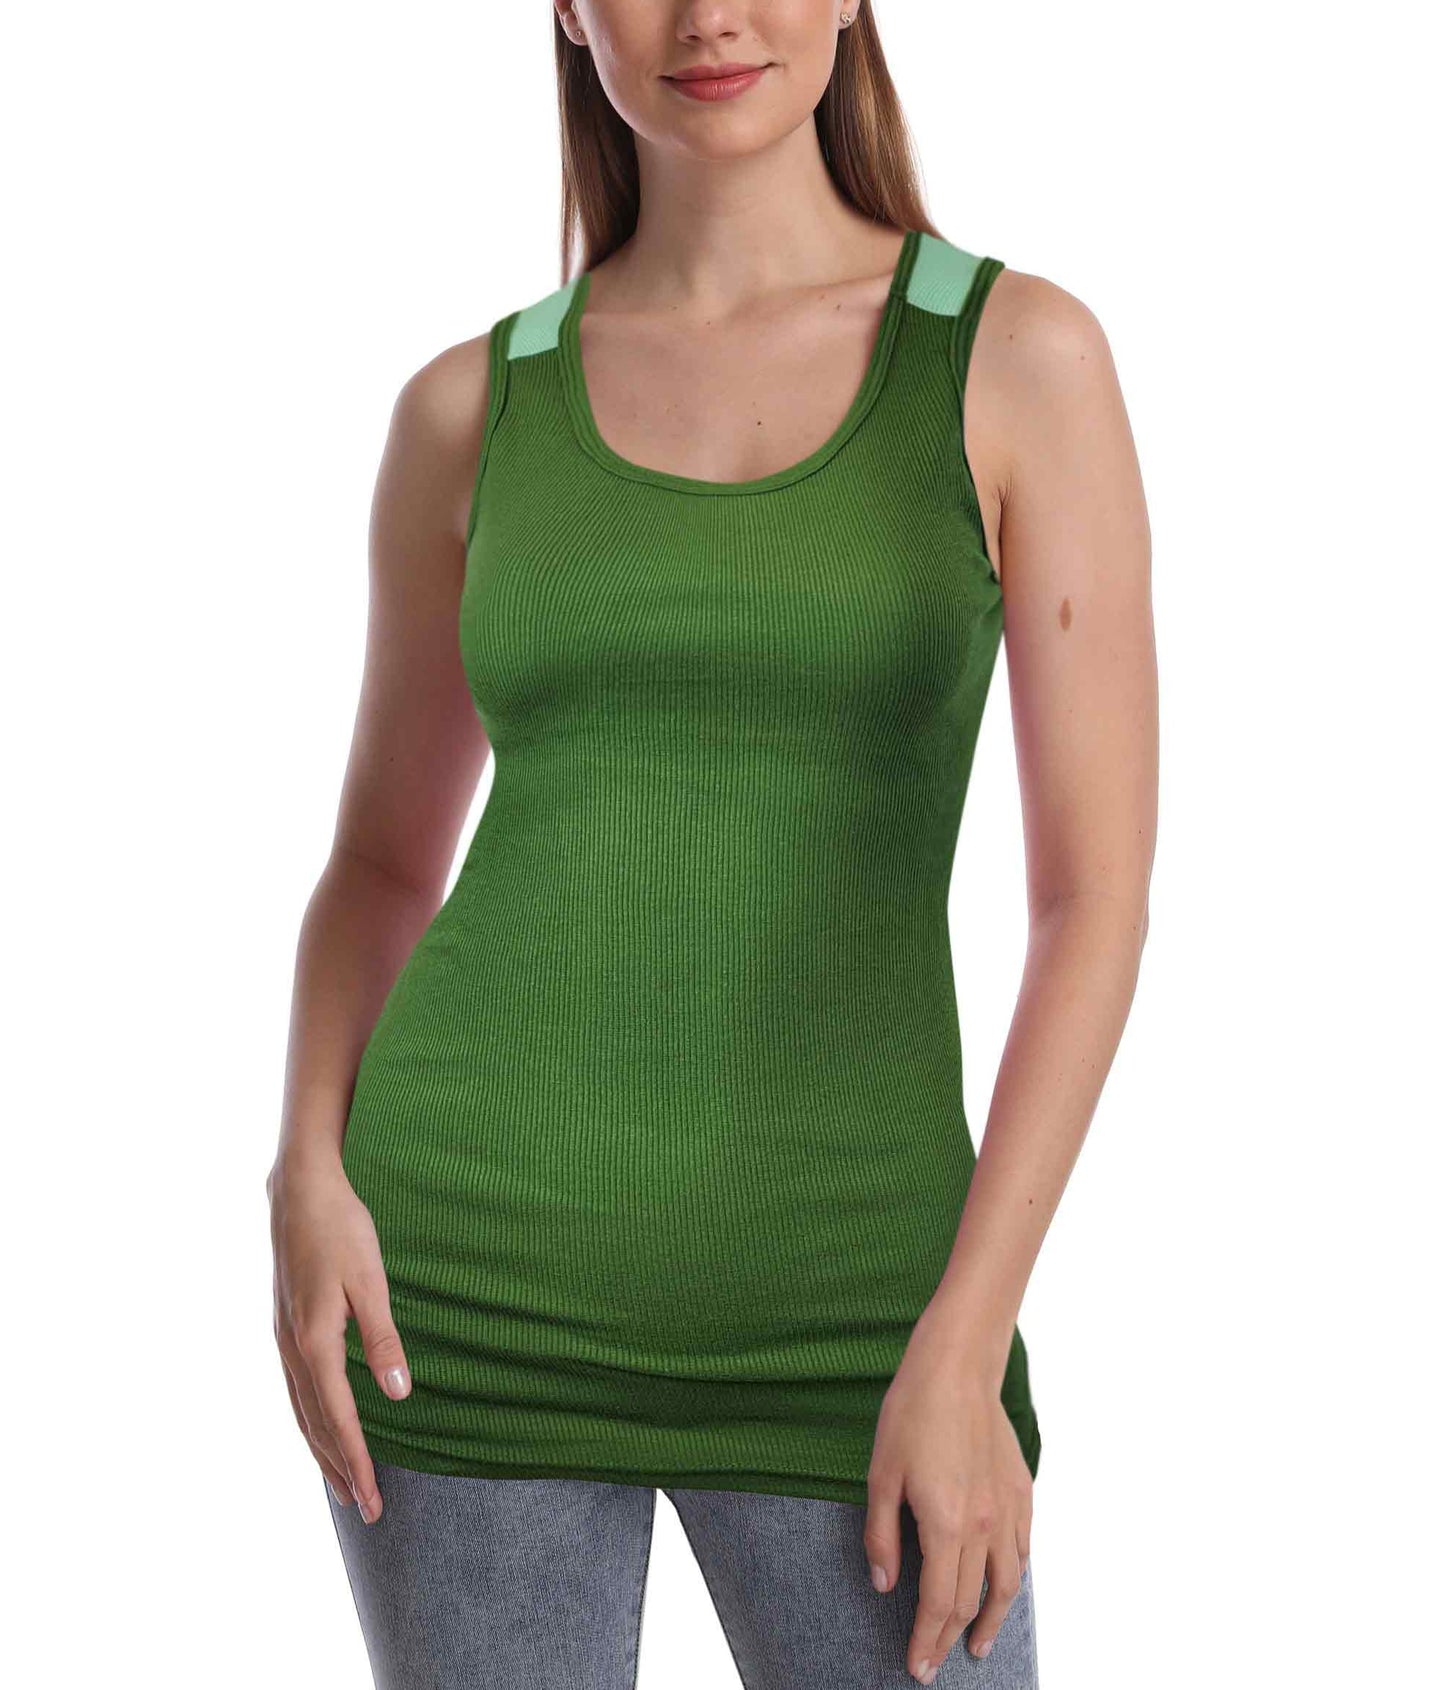 SUMONA Women Round Neck Accent Two Tones Casual Basic Ribbed Tank Top